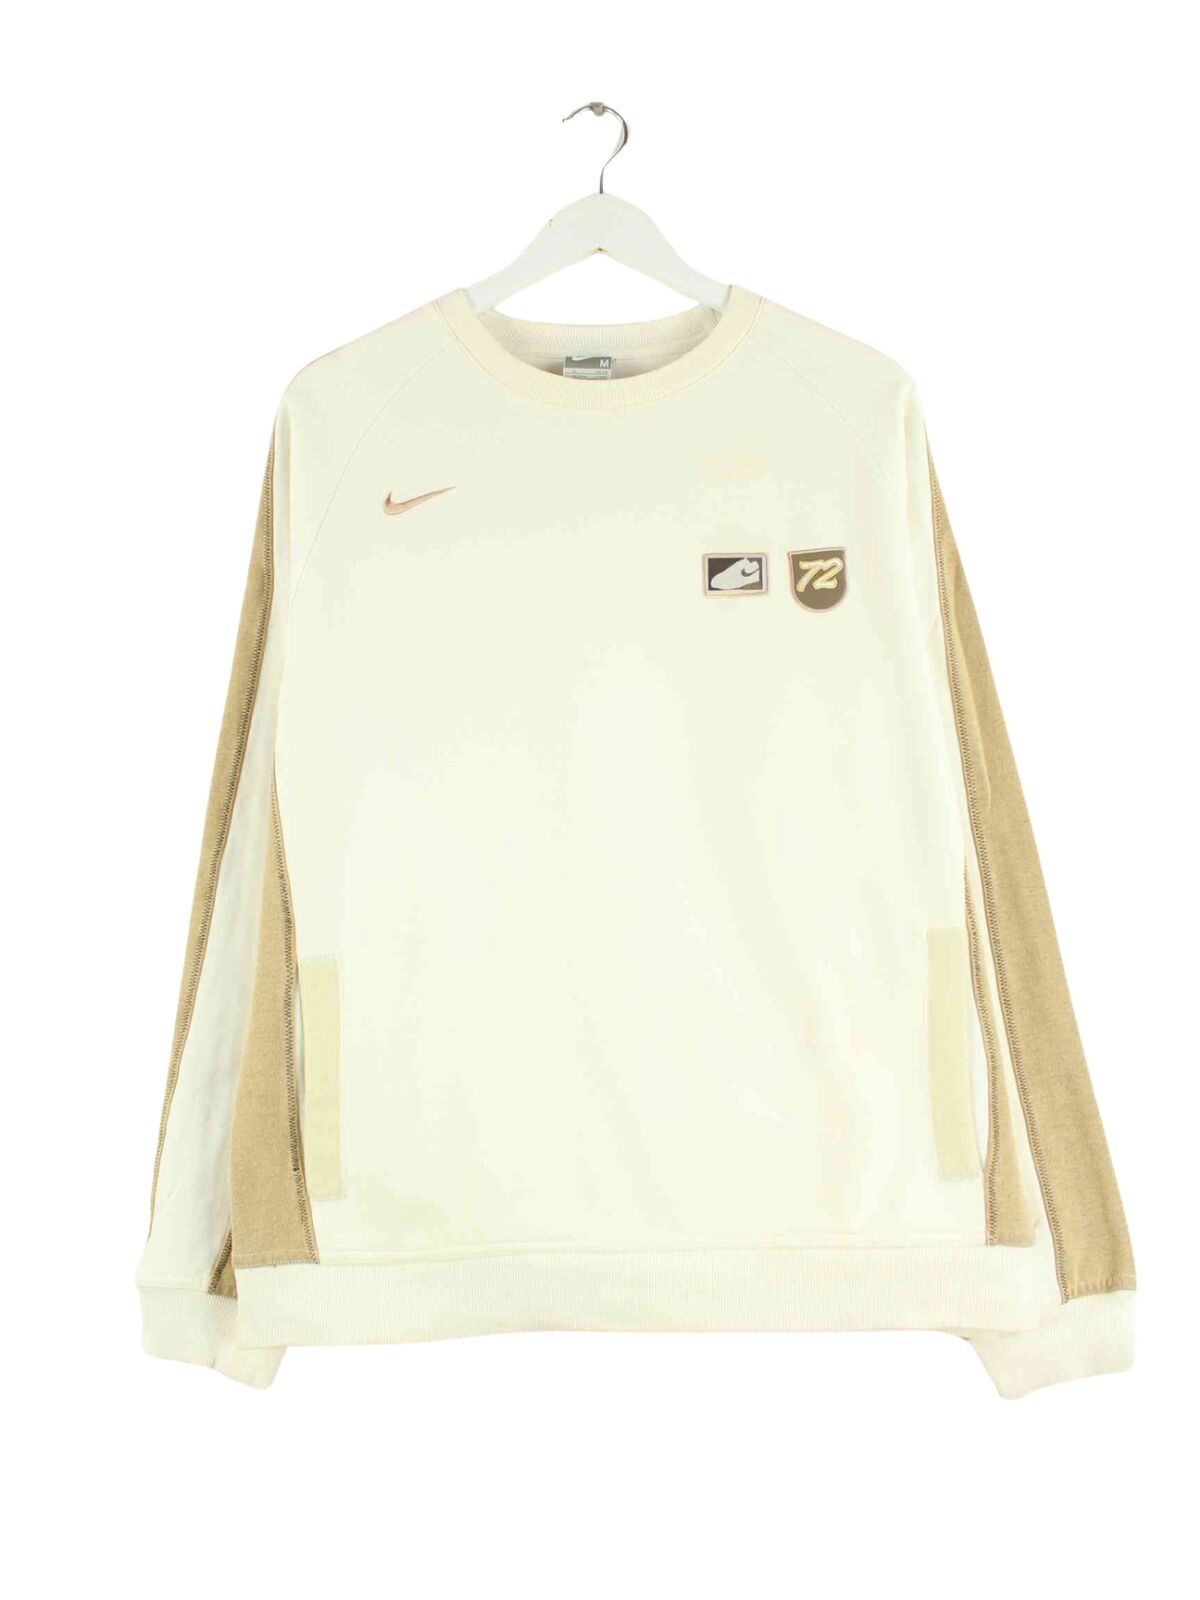 Nike y2k Athle71c Sweater Beige M (front image)